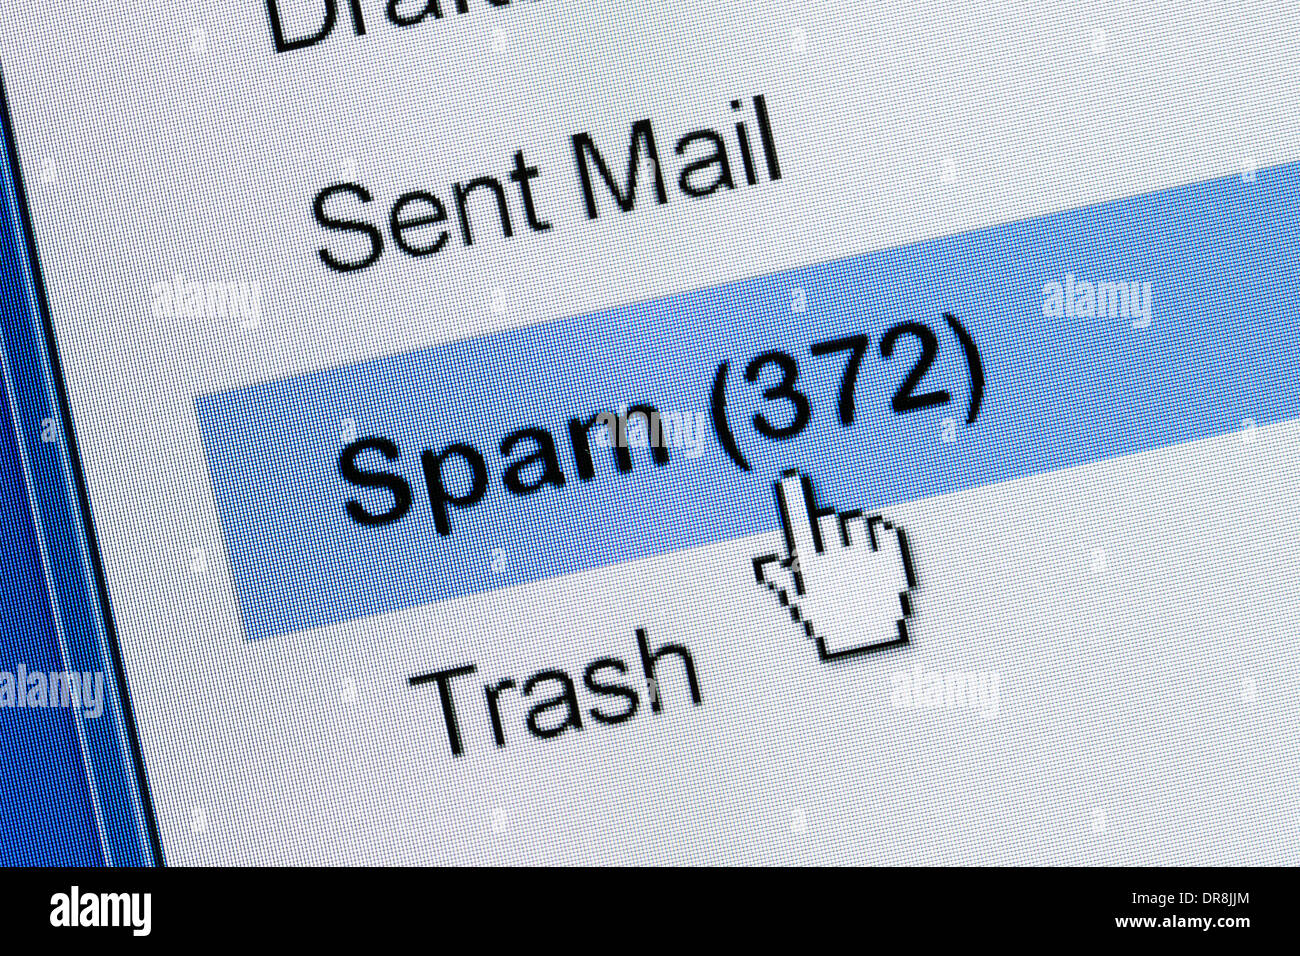 Computer Monitor screen, concept of spam email Stock Photo